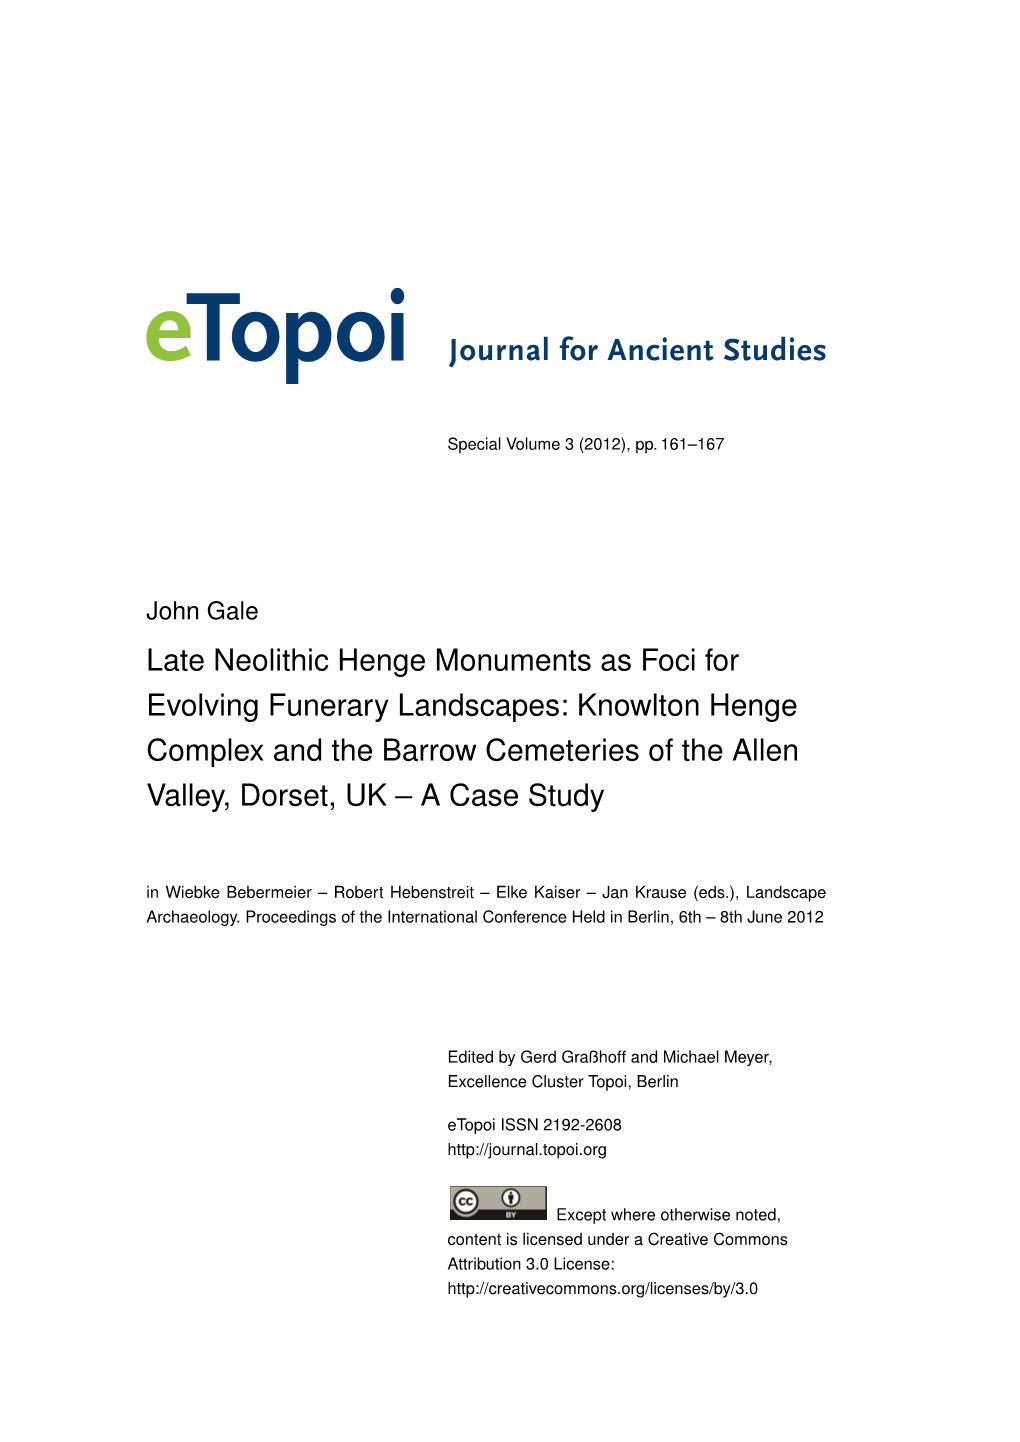 Late Neolithic Henge Monuments As Foci for Evolving Funerary Landscapes